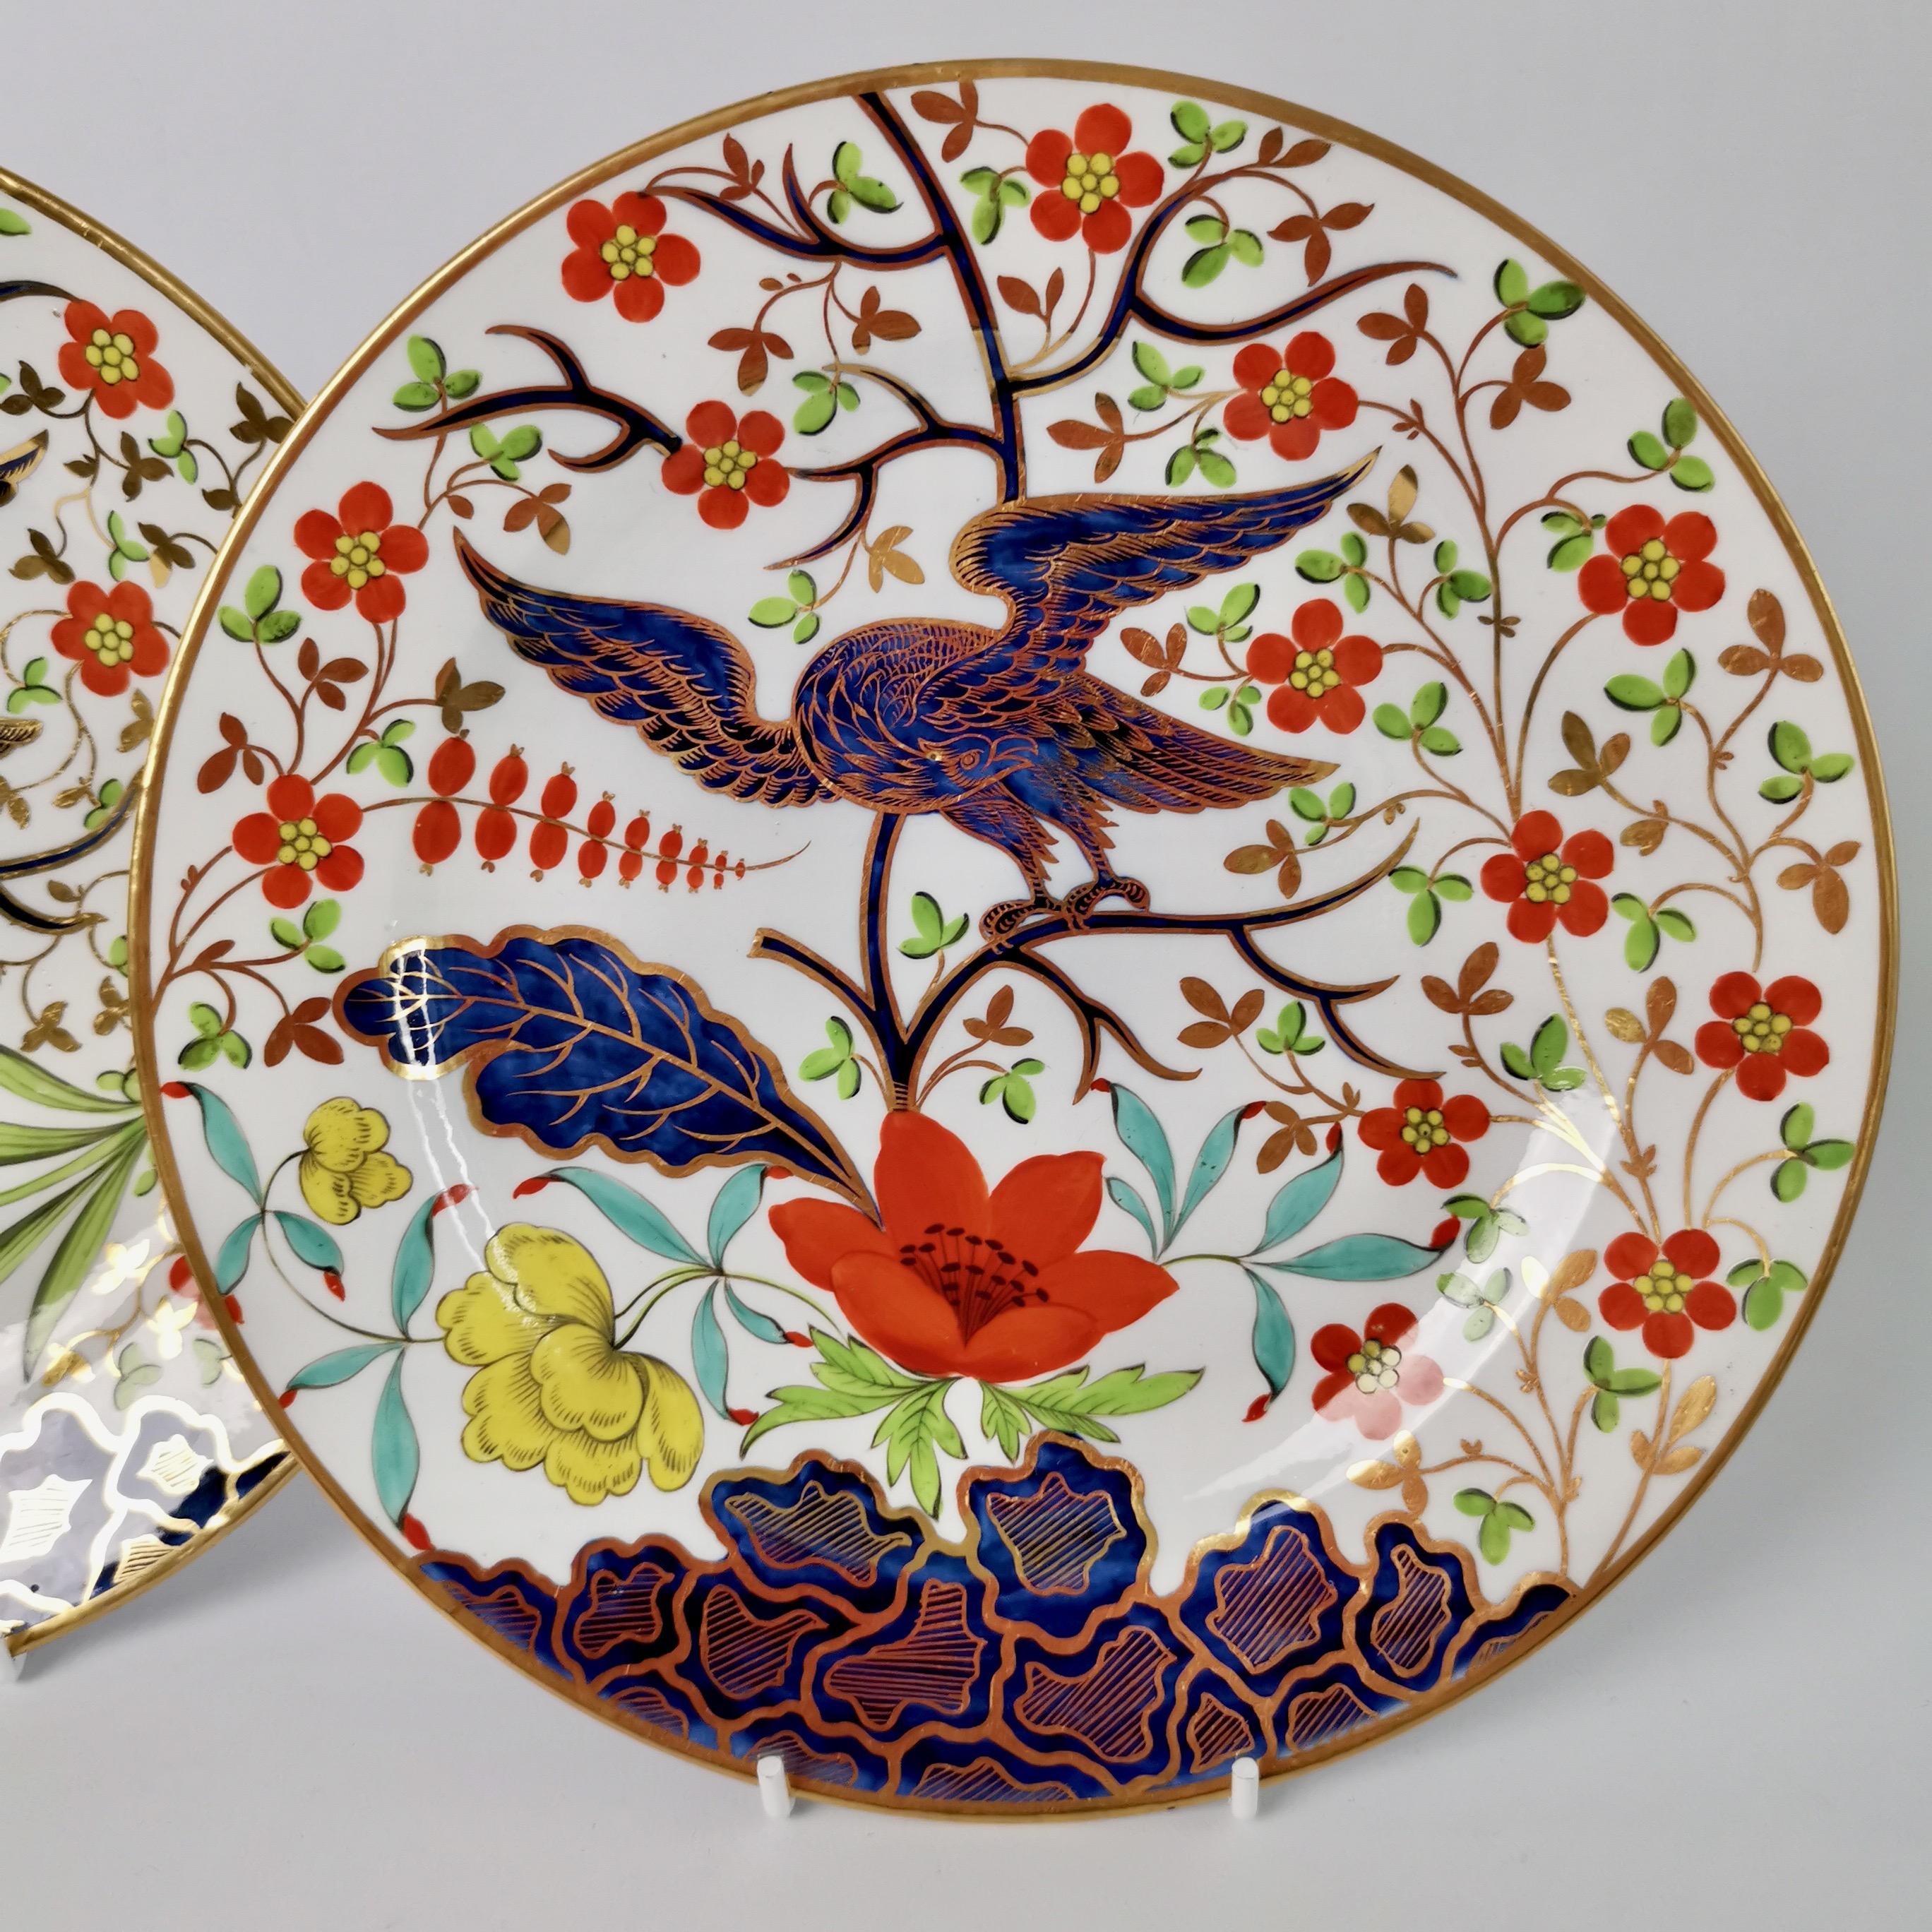 This is a stunning pair of dessert plates made by Chamberlains Worcester in about 1805. The plates have a stunning decoration in the 